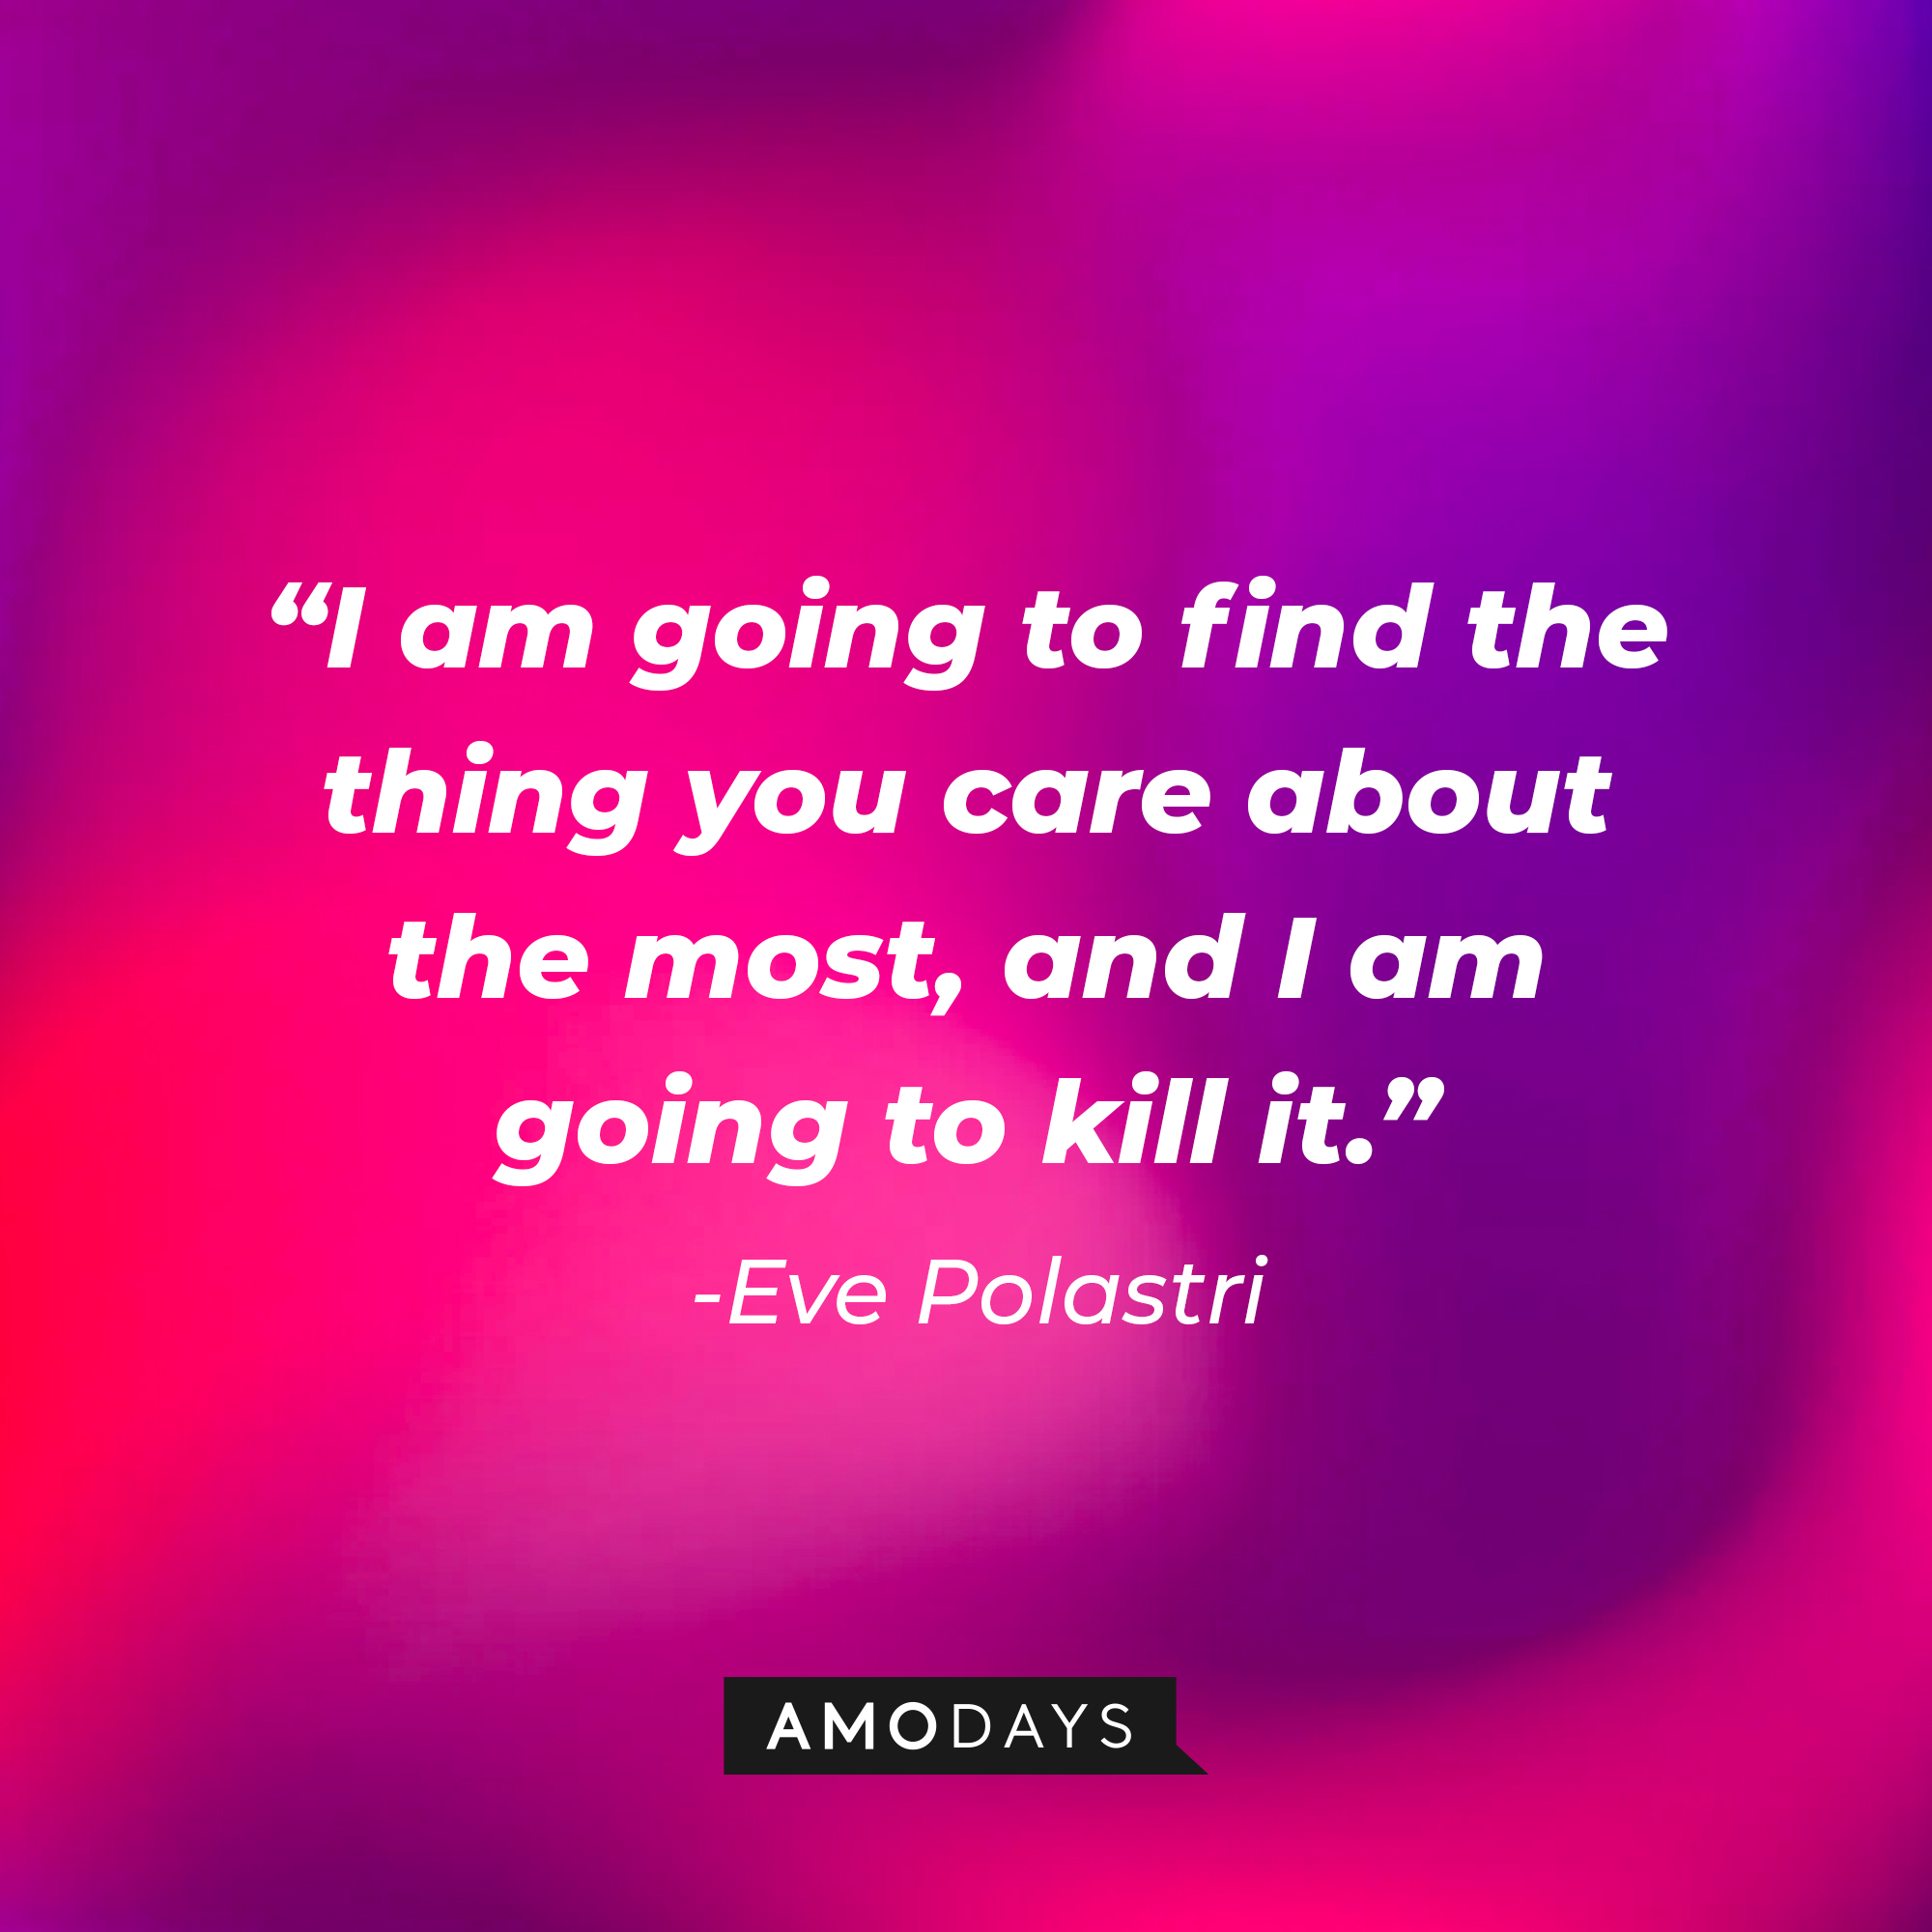 Eve Polastri’s quote: “I am going to find the thing you care about the most, and I am going to kill it.” | Source: AmoDays